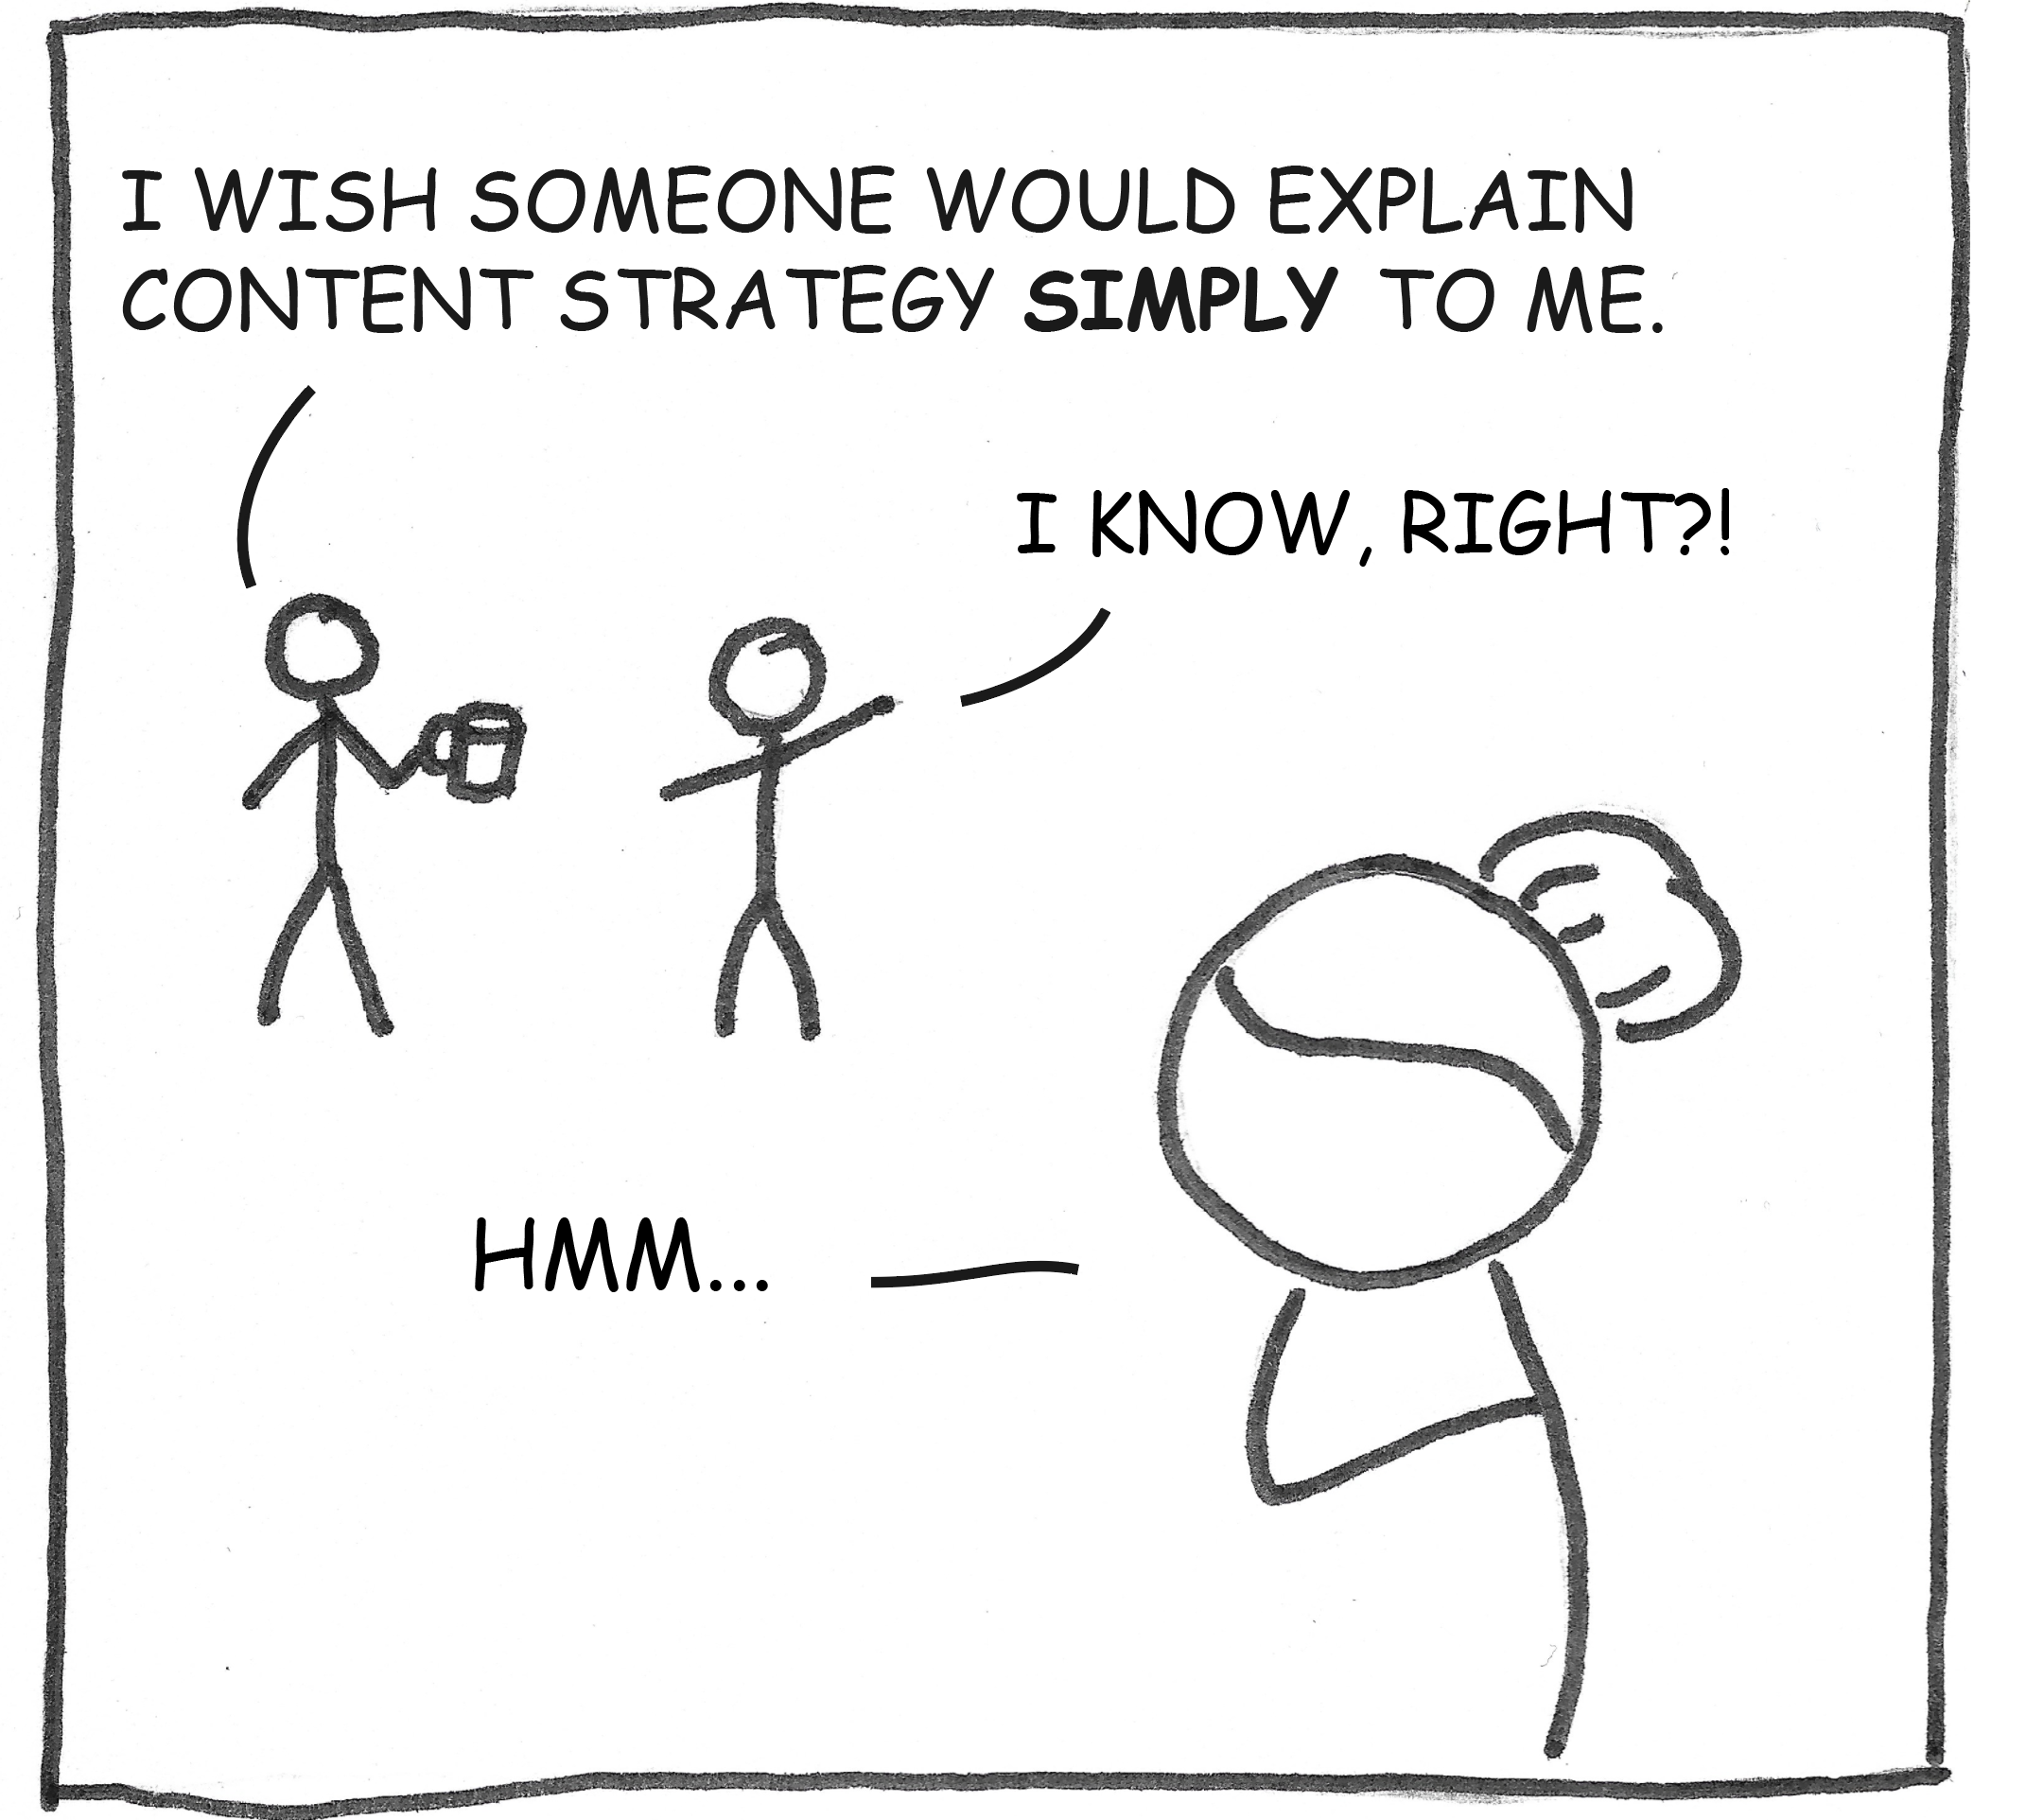 A content marketer overhears people confused about content strategy.